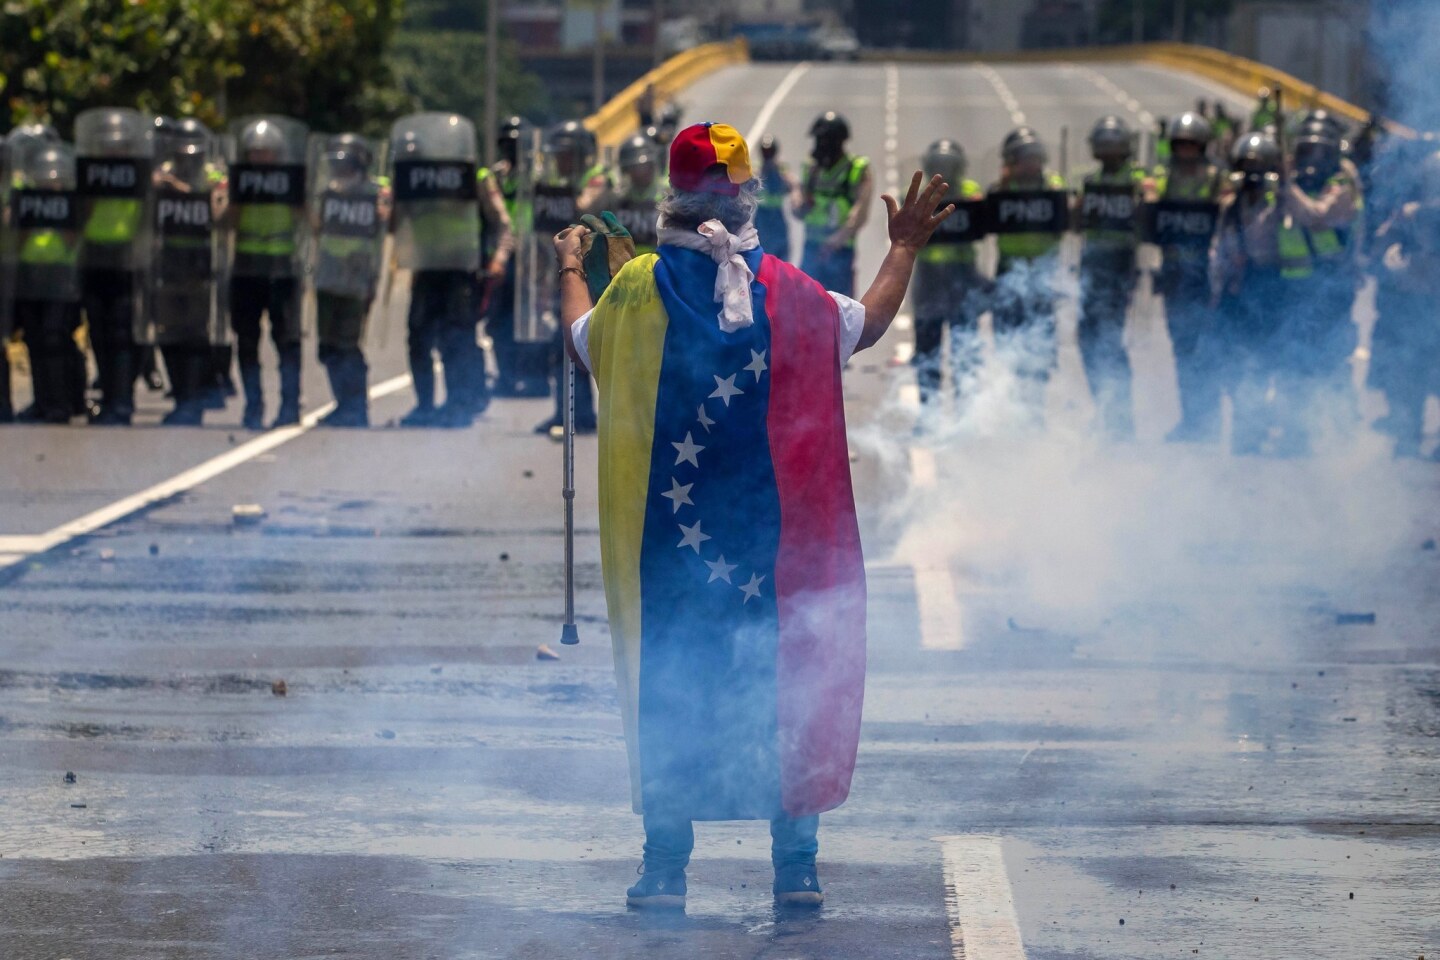 A man draped in the Venezuelan flag faces off with Bolivian National Police as demonstrators and police clash in opposition protests in Caracas, Venezuela. Thousands of Venezuelans are once again taking to streets in protest against the government of President Nicolas Maduro.